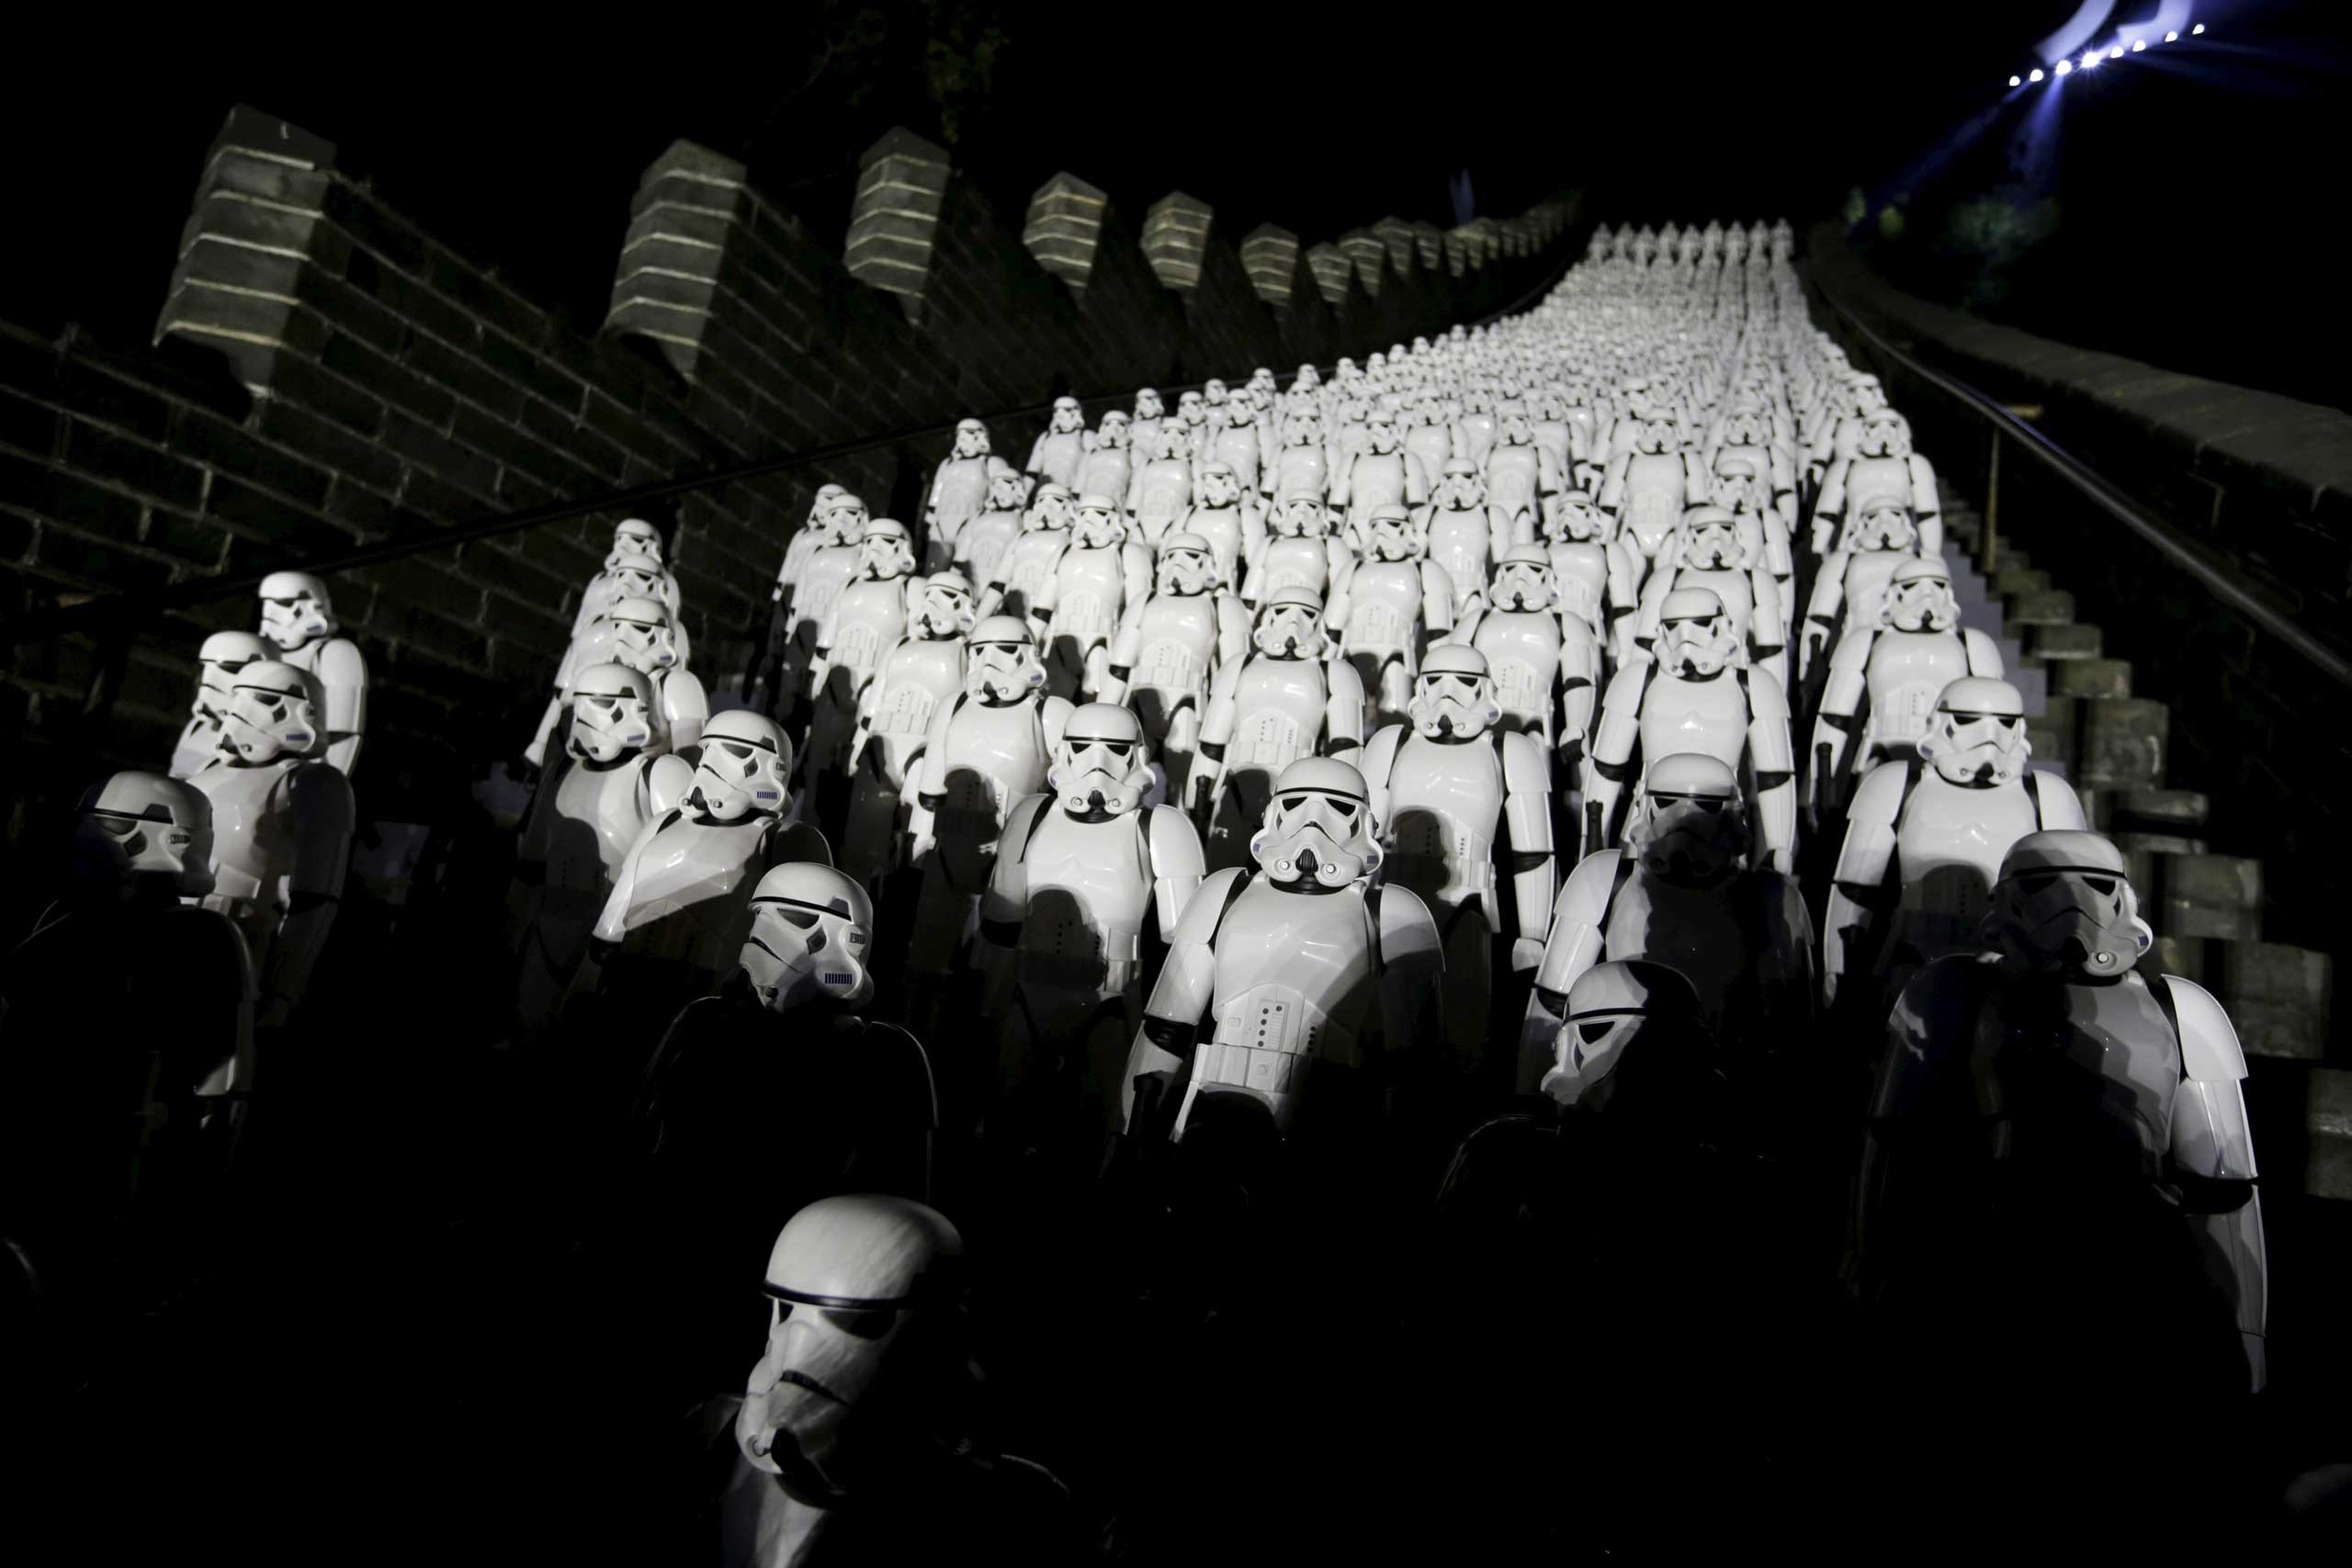 Five hundred replicas of the Stormtroopers characters from "Star Wars" are seen on the steps at the Juyongguan section of the Great Wall of China during a promotional event for "Star Wars: The Force Awakens" film, on the outskirts of Beijing, Oct. 20, 2015. (Jason Lee—Reuters)